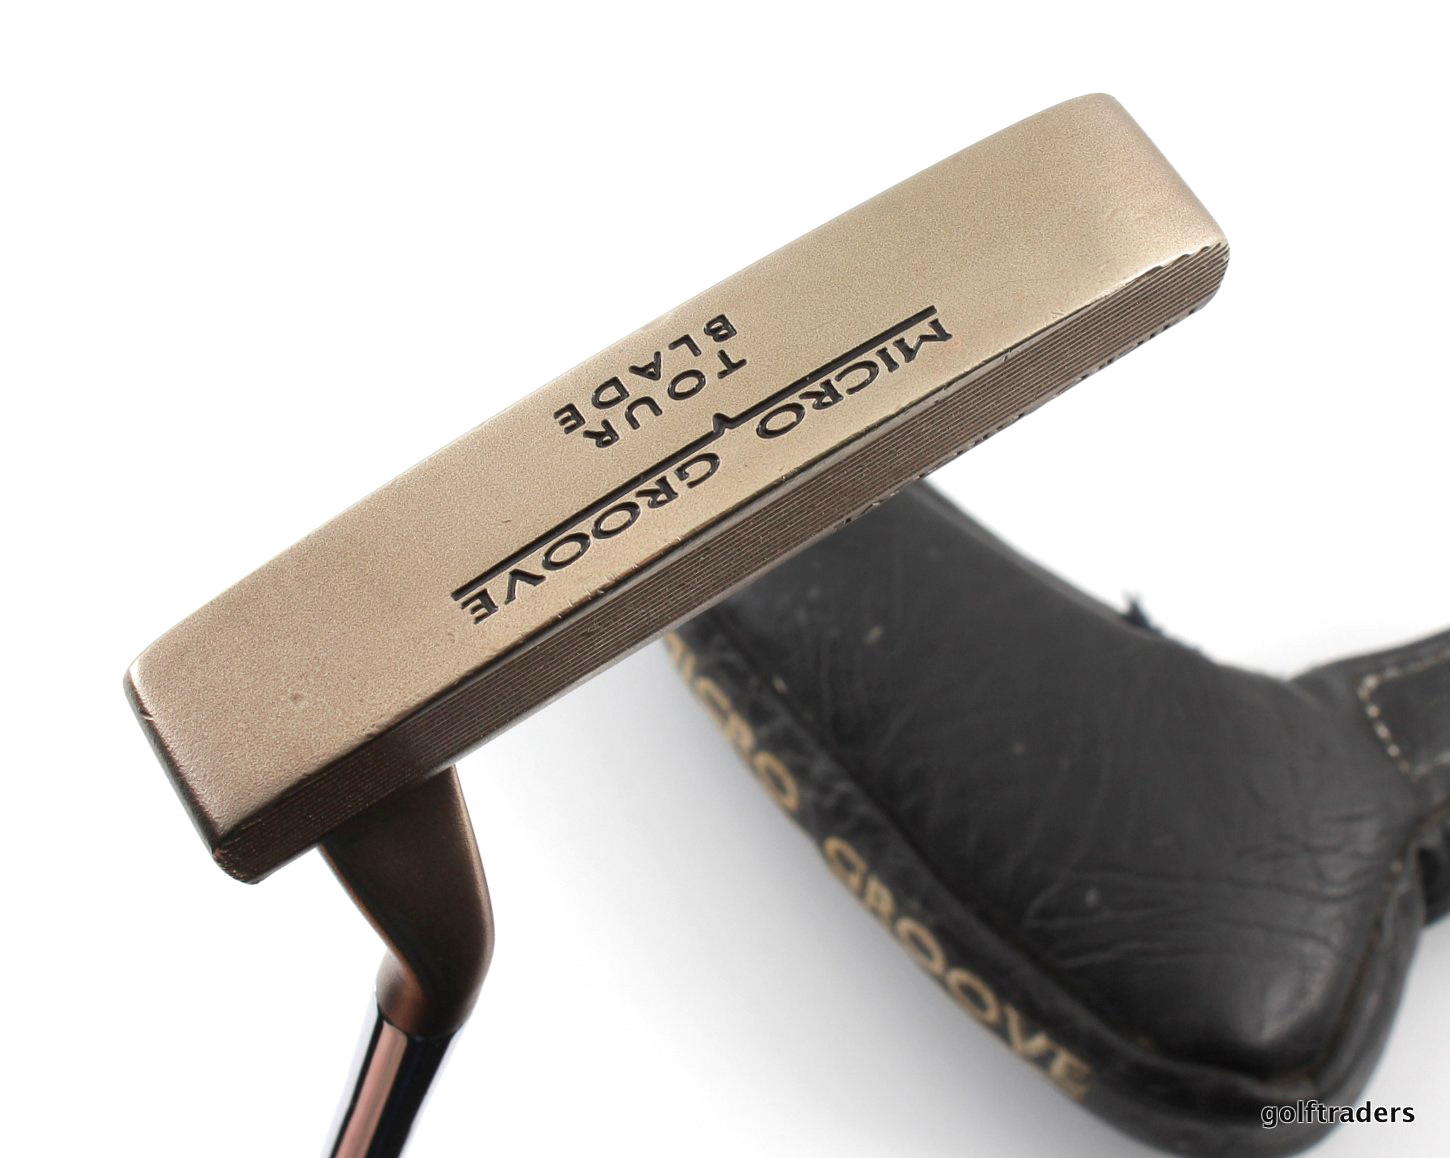 top flite micro groove tour blade putter 35